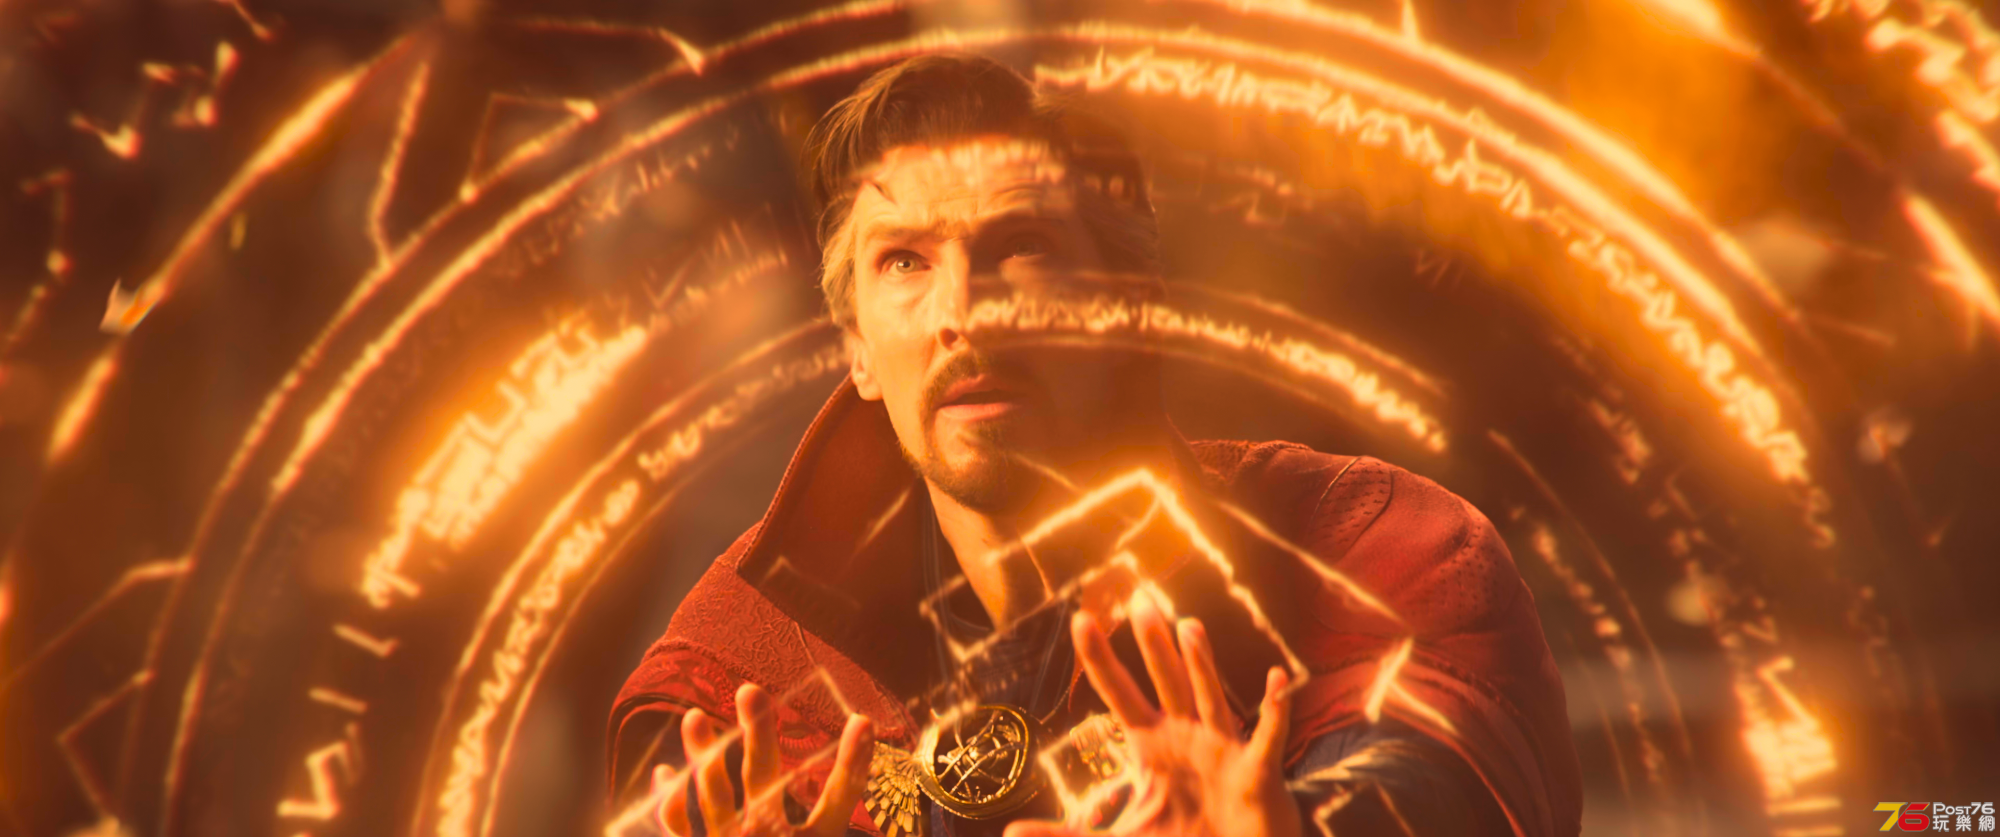 Doctor.Strange.in.the.Multiverse.of.Madness.2022.2160p.WEB-DL.x265.10bit.HDR.DDP.png